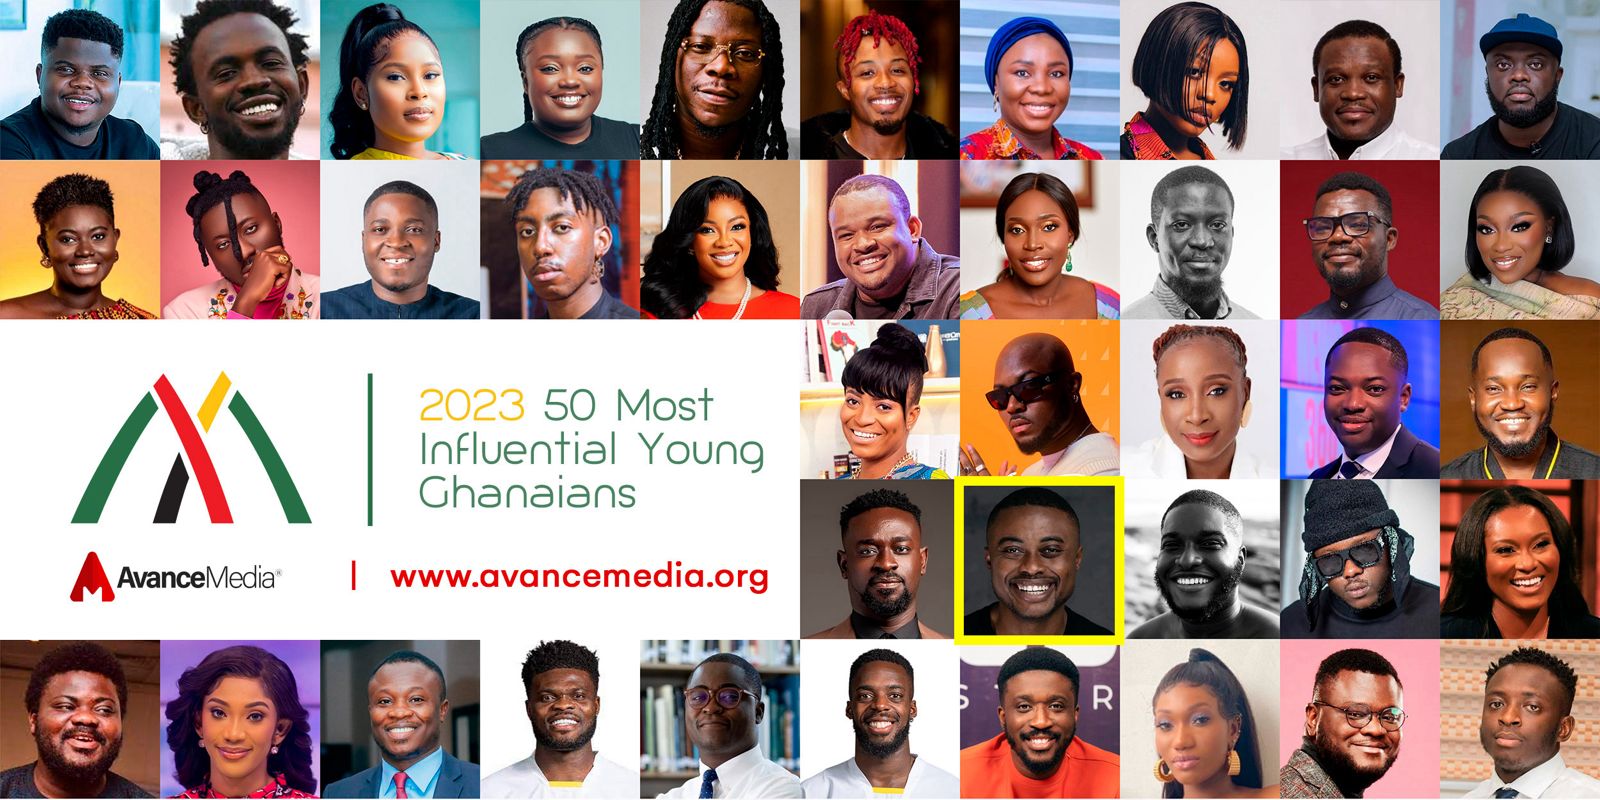 Olele Salvador named among 50 most Influential Young Ghanaians